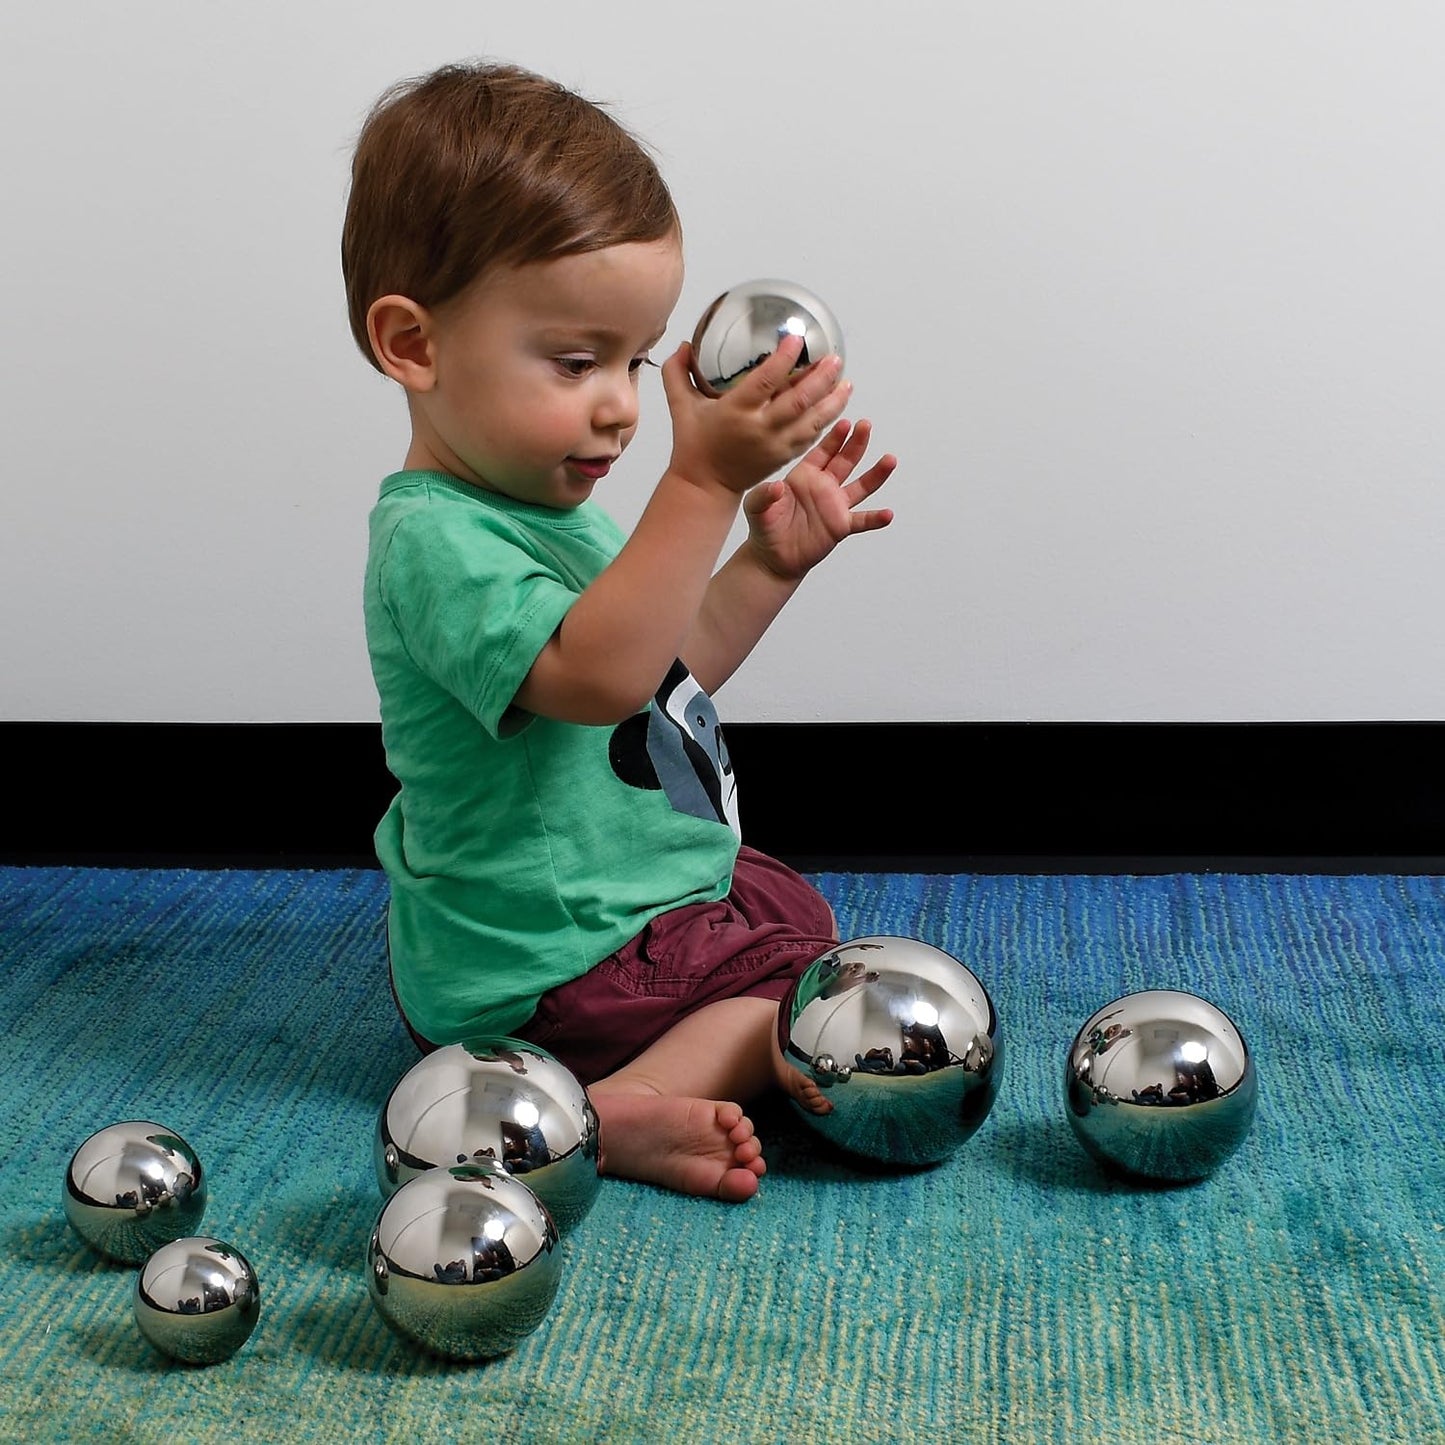 Sensory Reflective Sound Balls - Set of 7 - Multi-Sensory Toy for Babies, Toddlers - Resource for Special Educational Needs